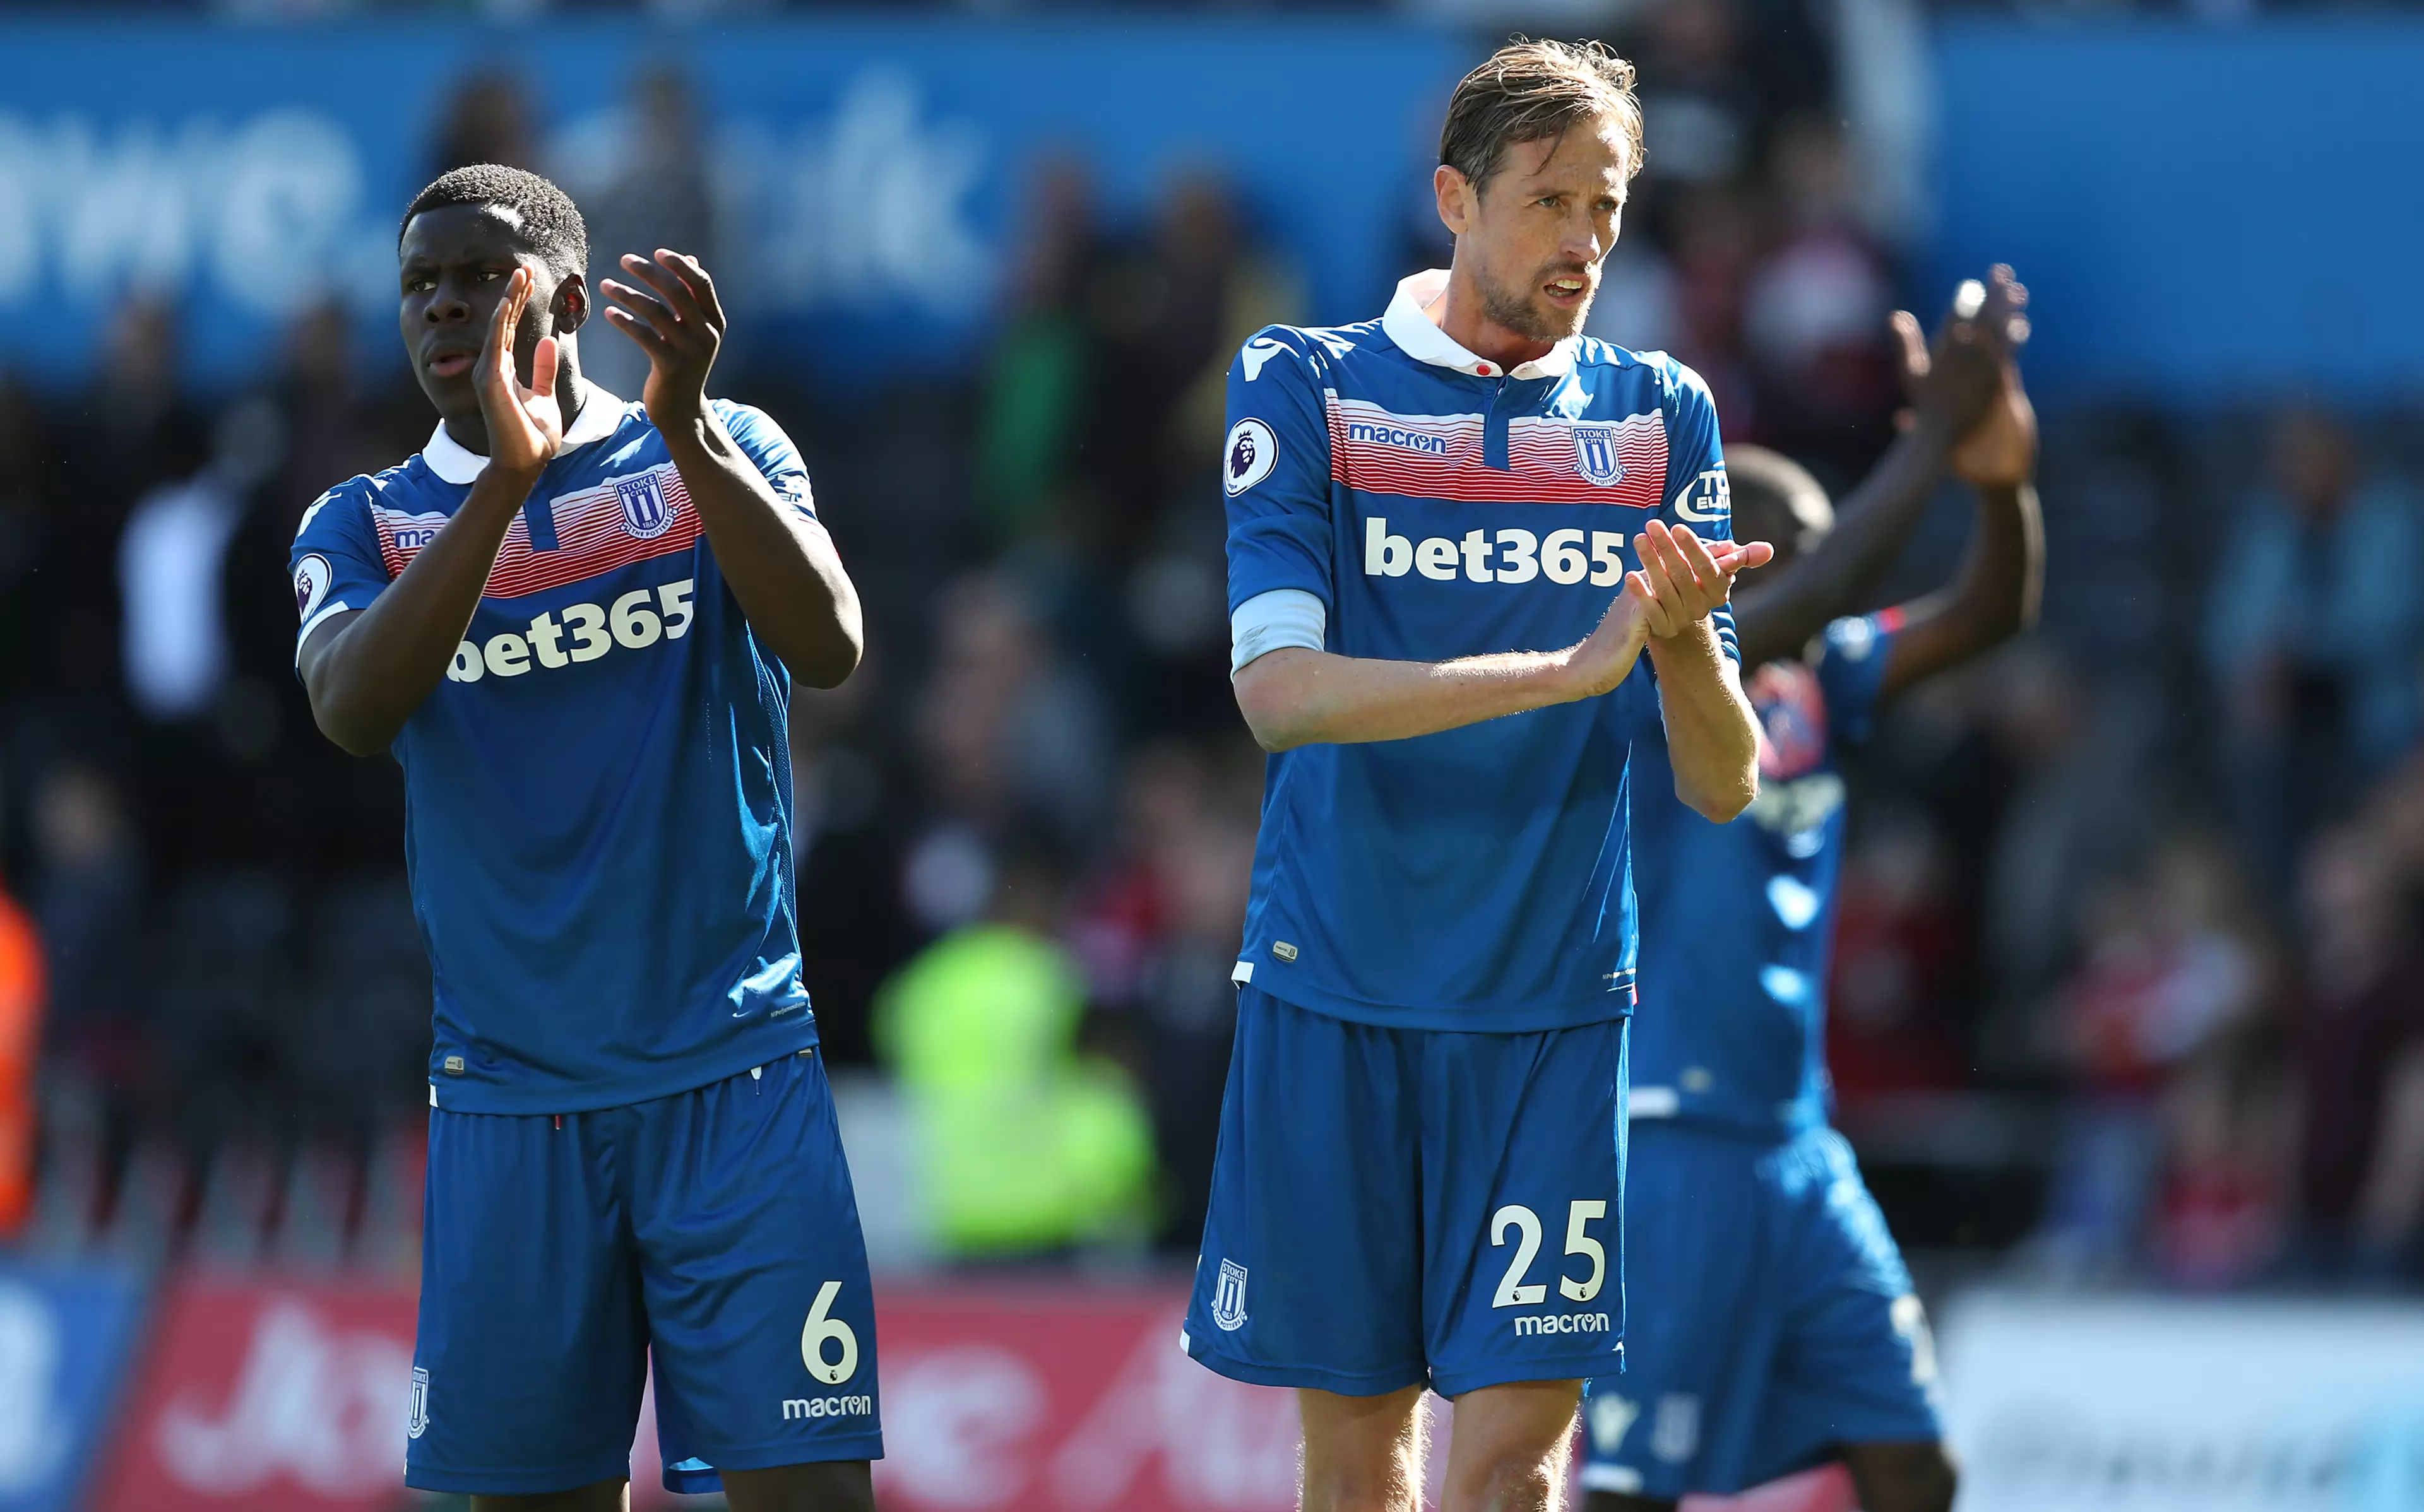 Stoke players applaud fans after getting relegated. Image: PA Images